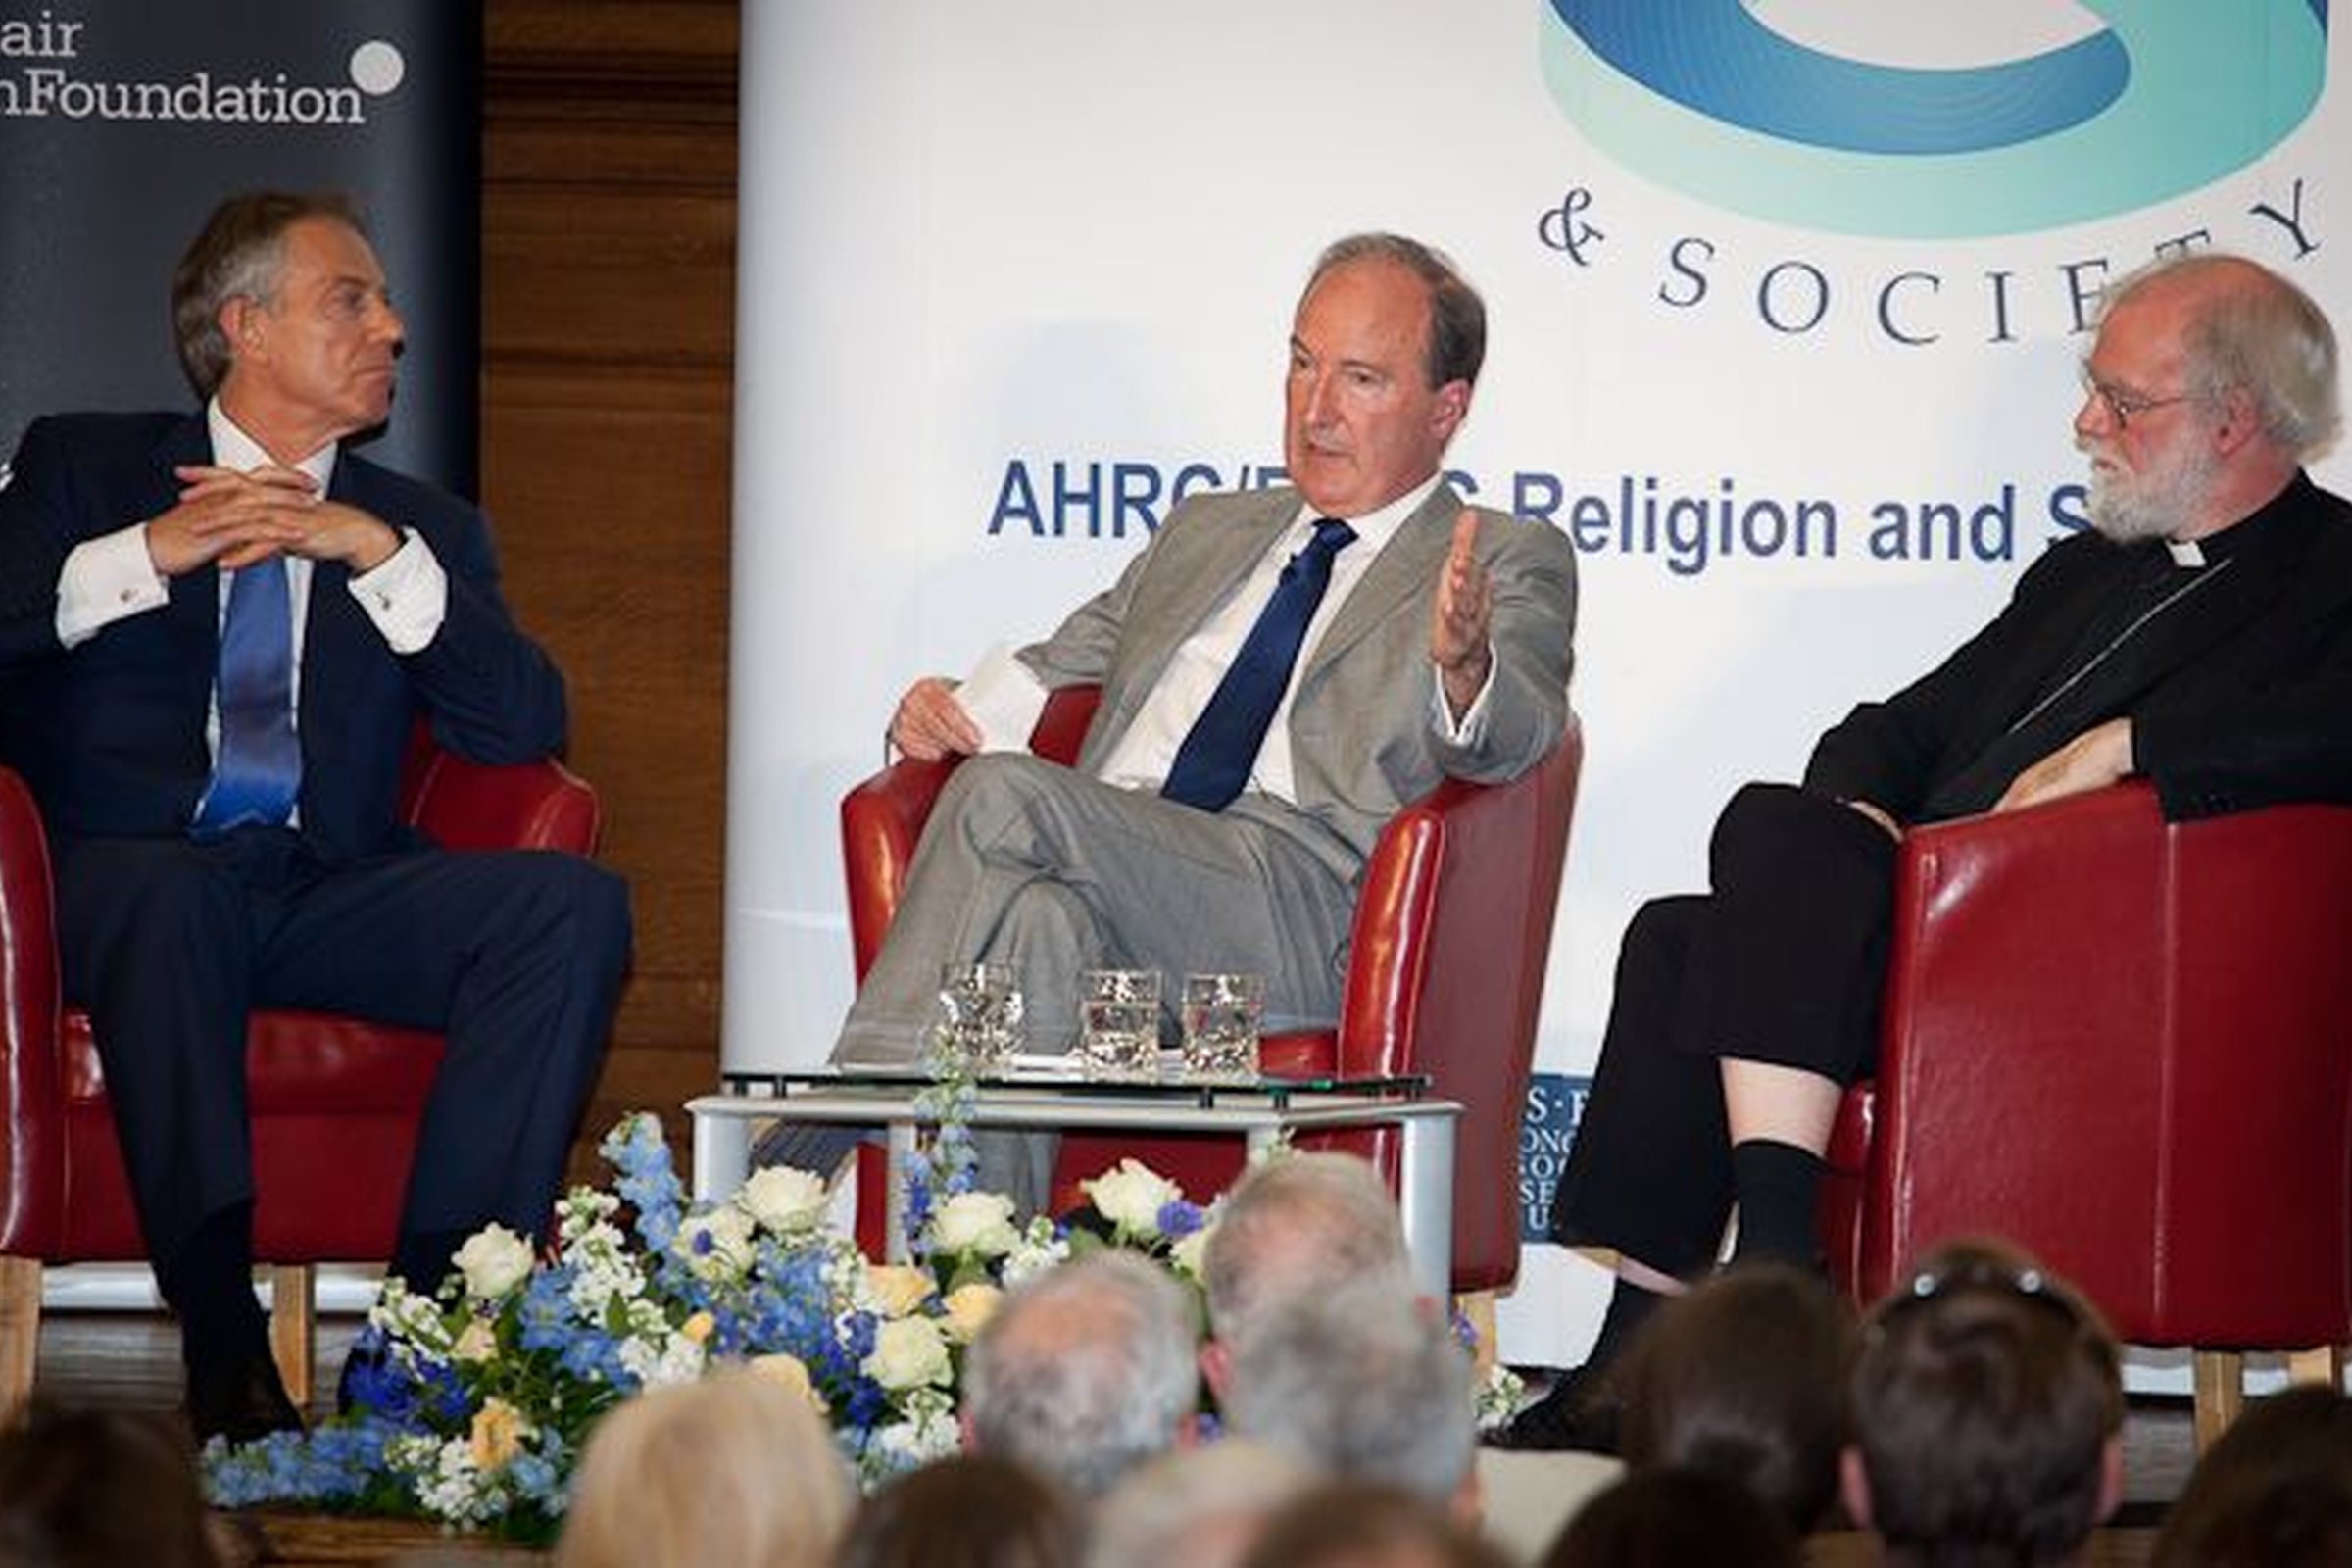 'Religious Organisations in an age of shrinking welfare'